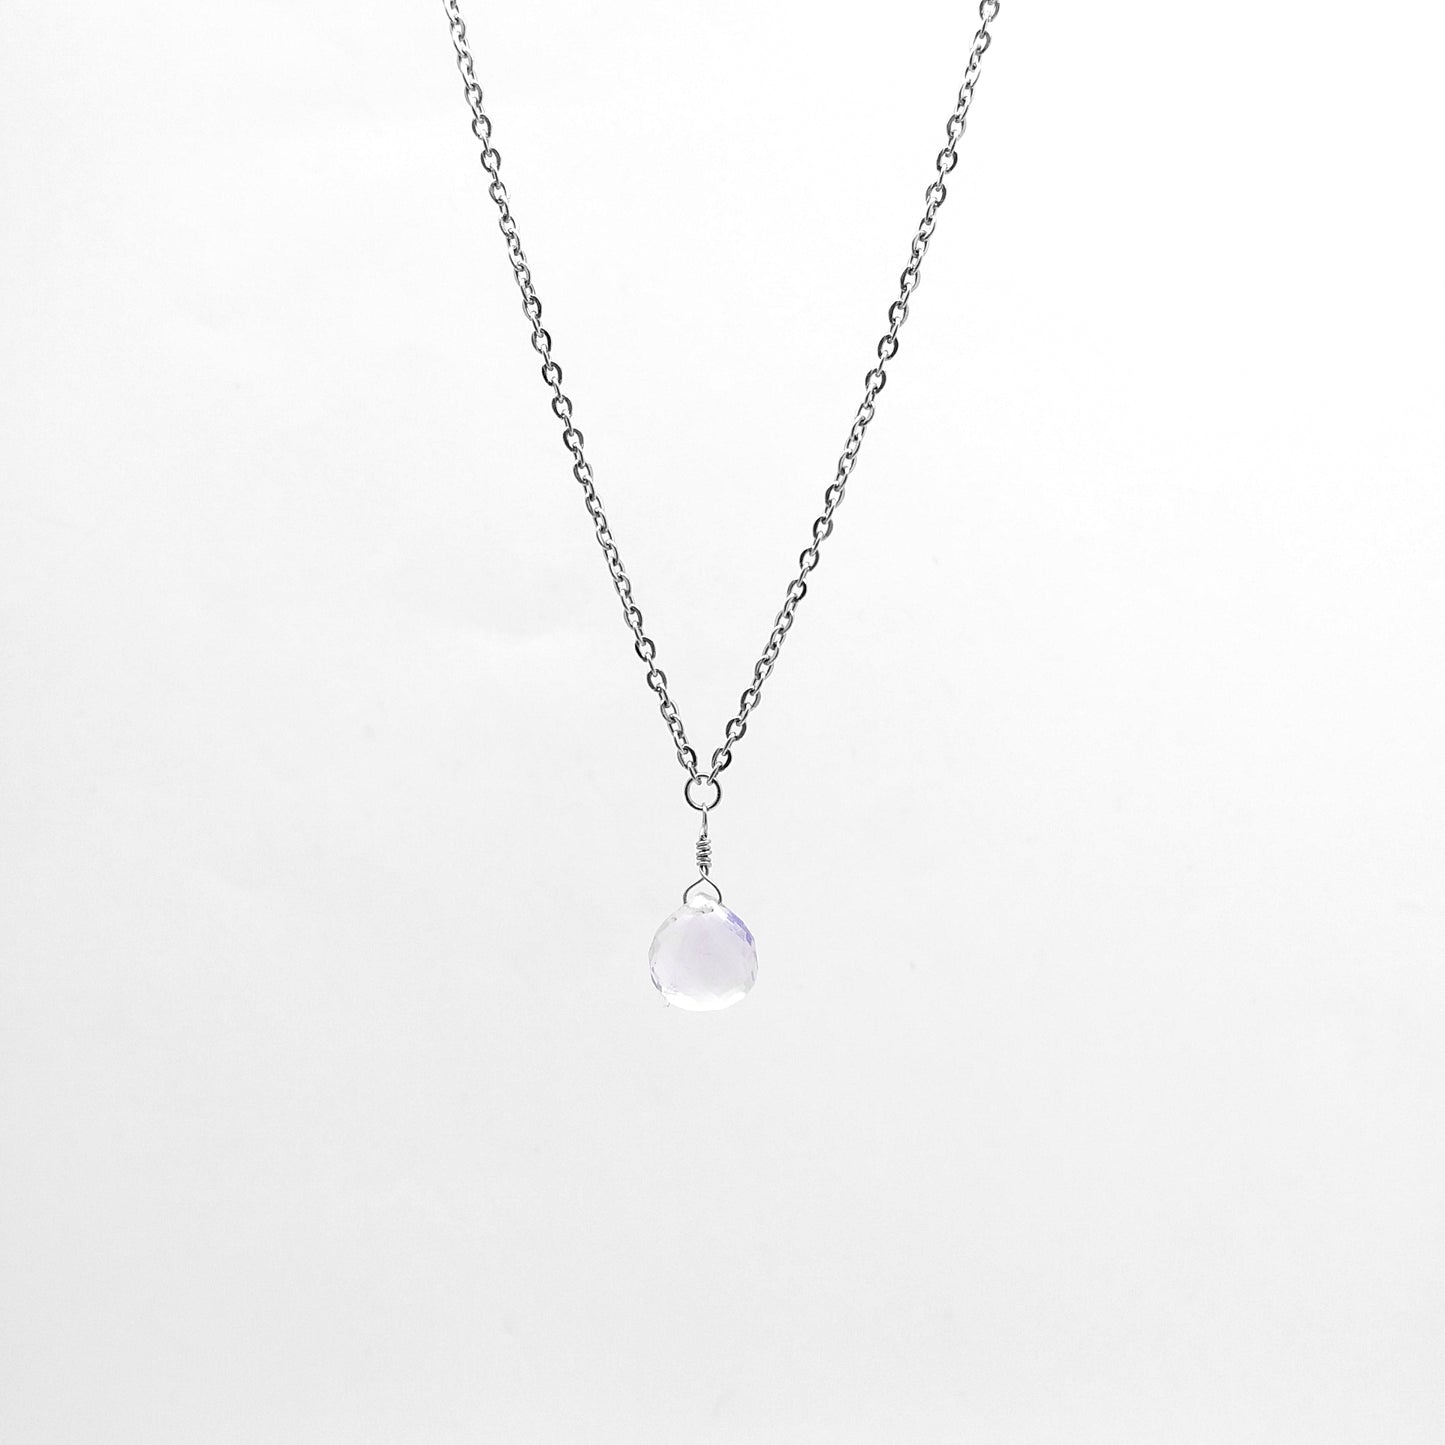 Faceted Pear Shaped Light Amethyst Necklace